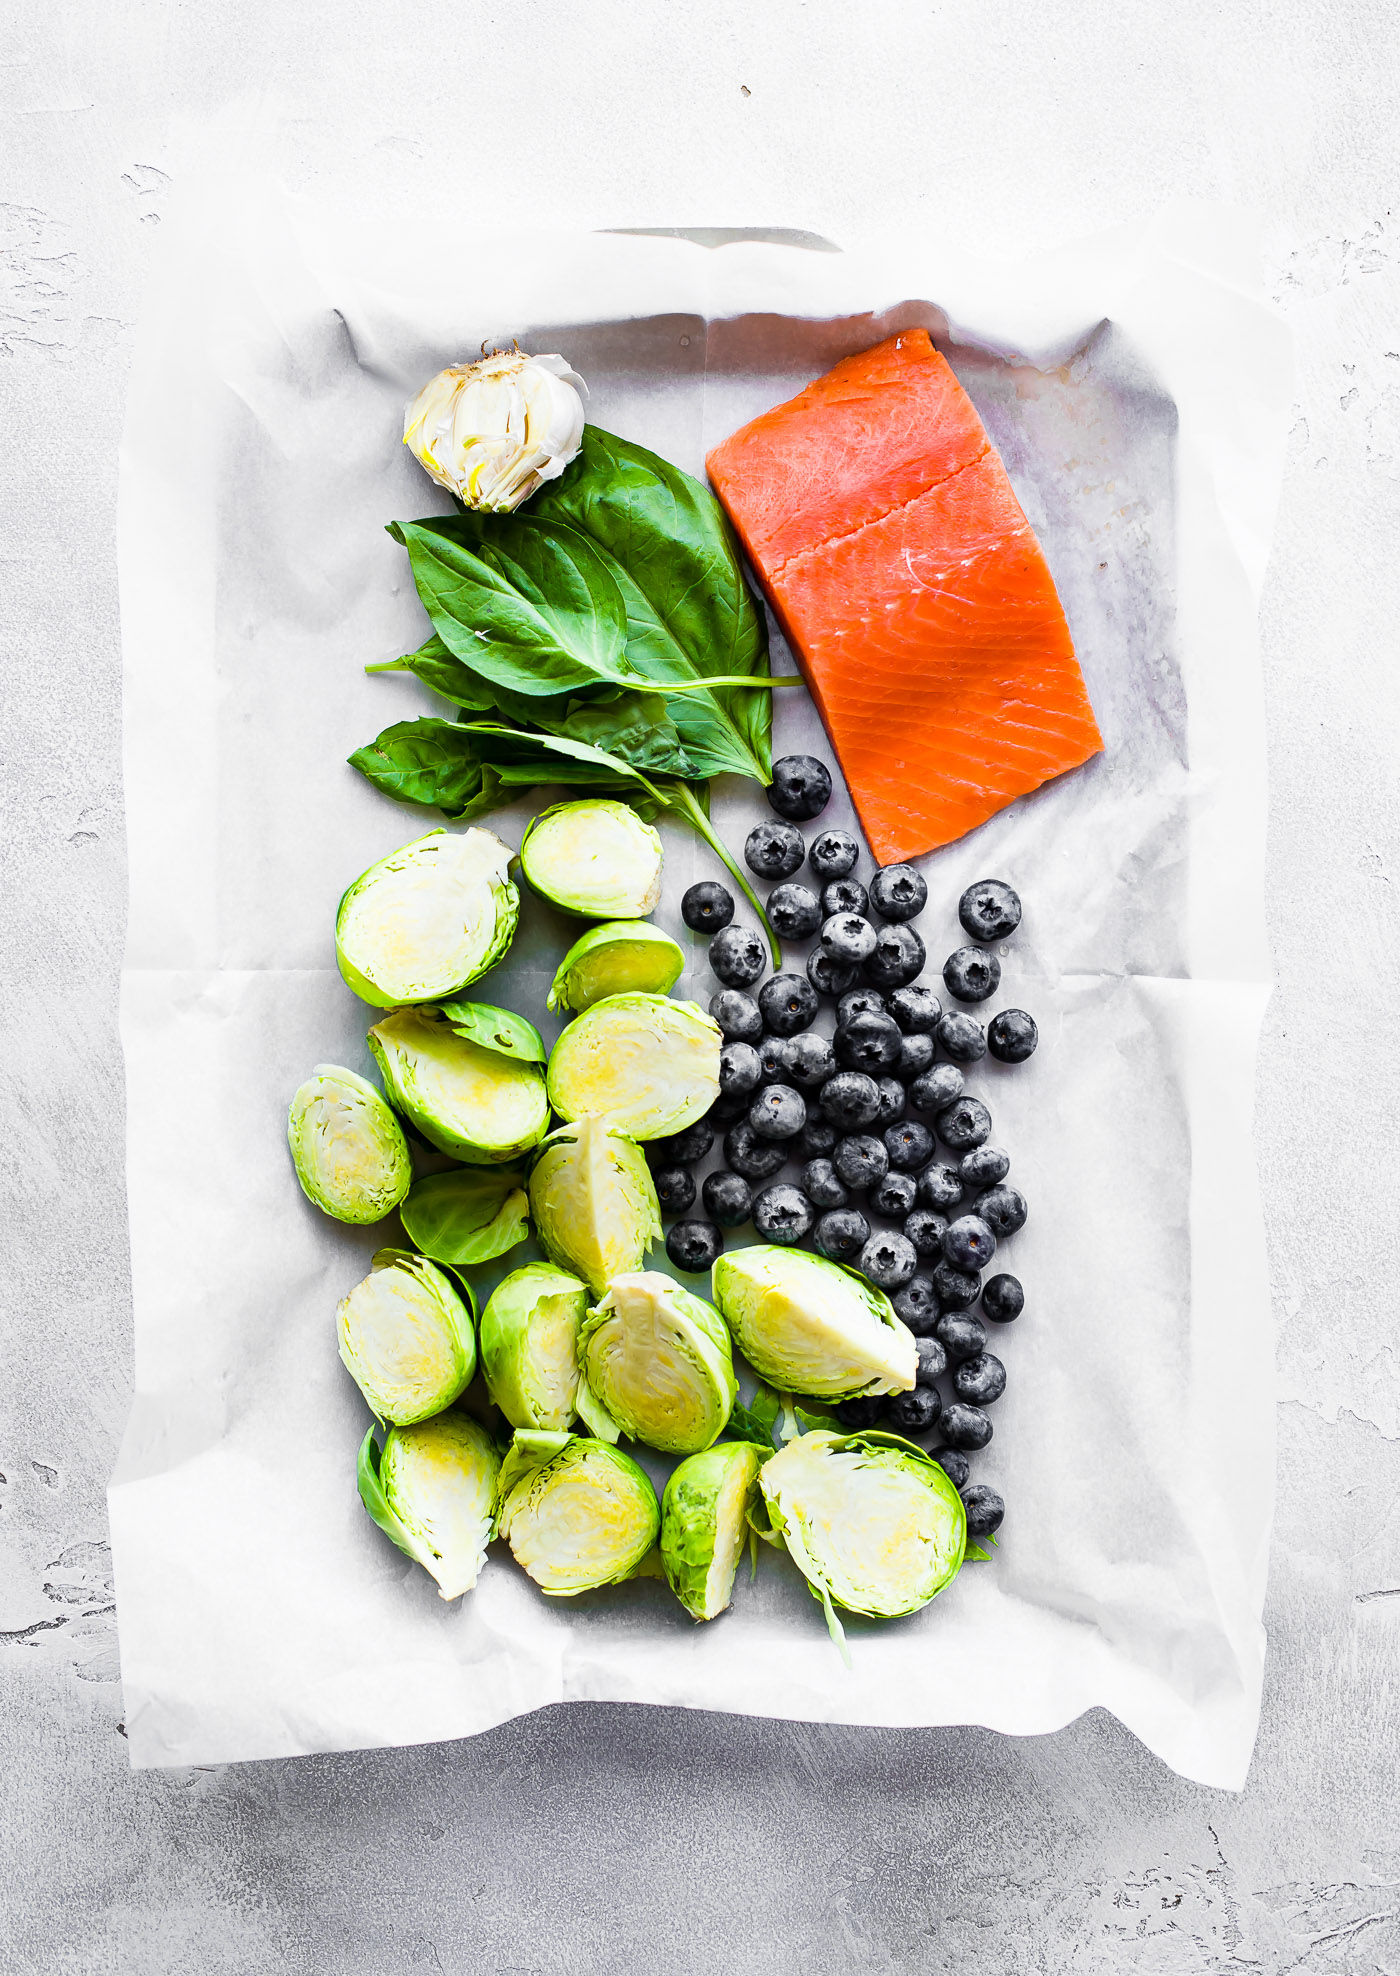 One pan Paleo SUPERFOOD Baked Salmon! This baked salmon recipe is ready in 20 minutes and packed full of nutrients. A nourishing, whole 30 friendly, flavorful meal! And all it takes is just a few simple real food ingredients.